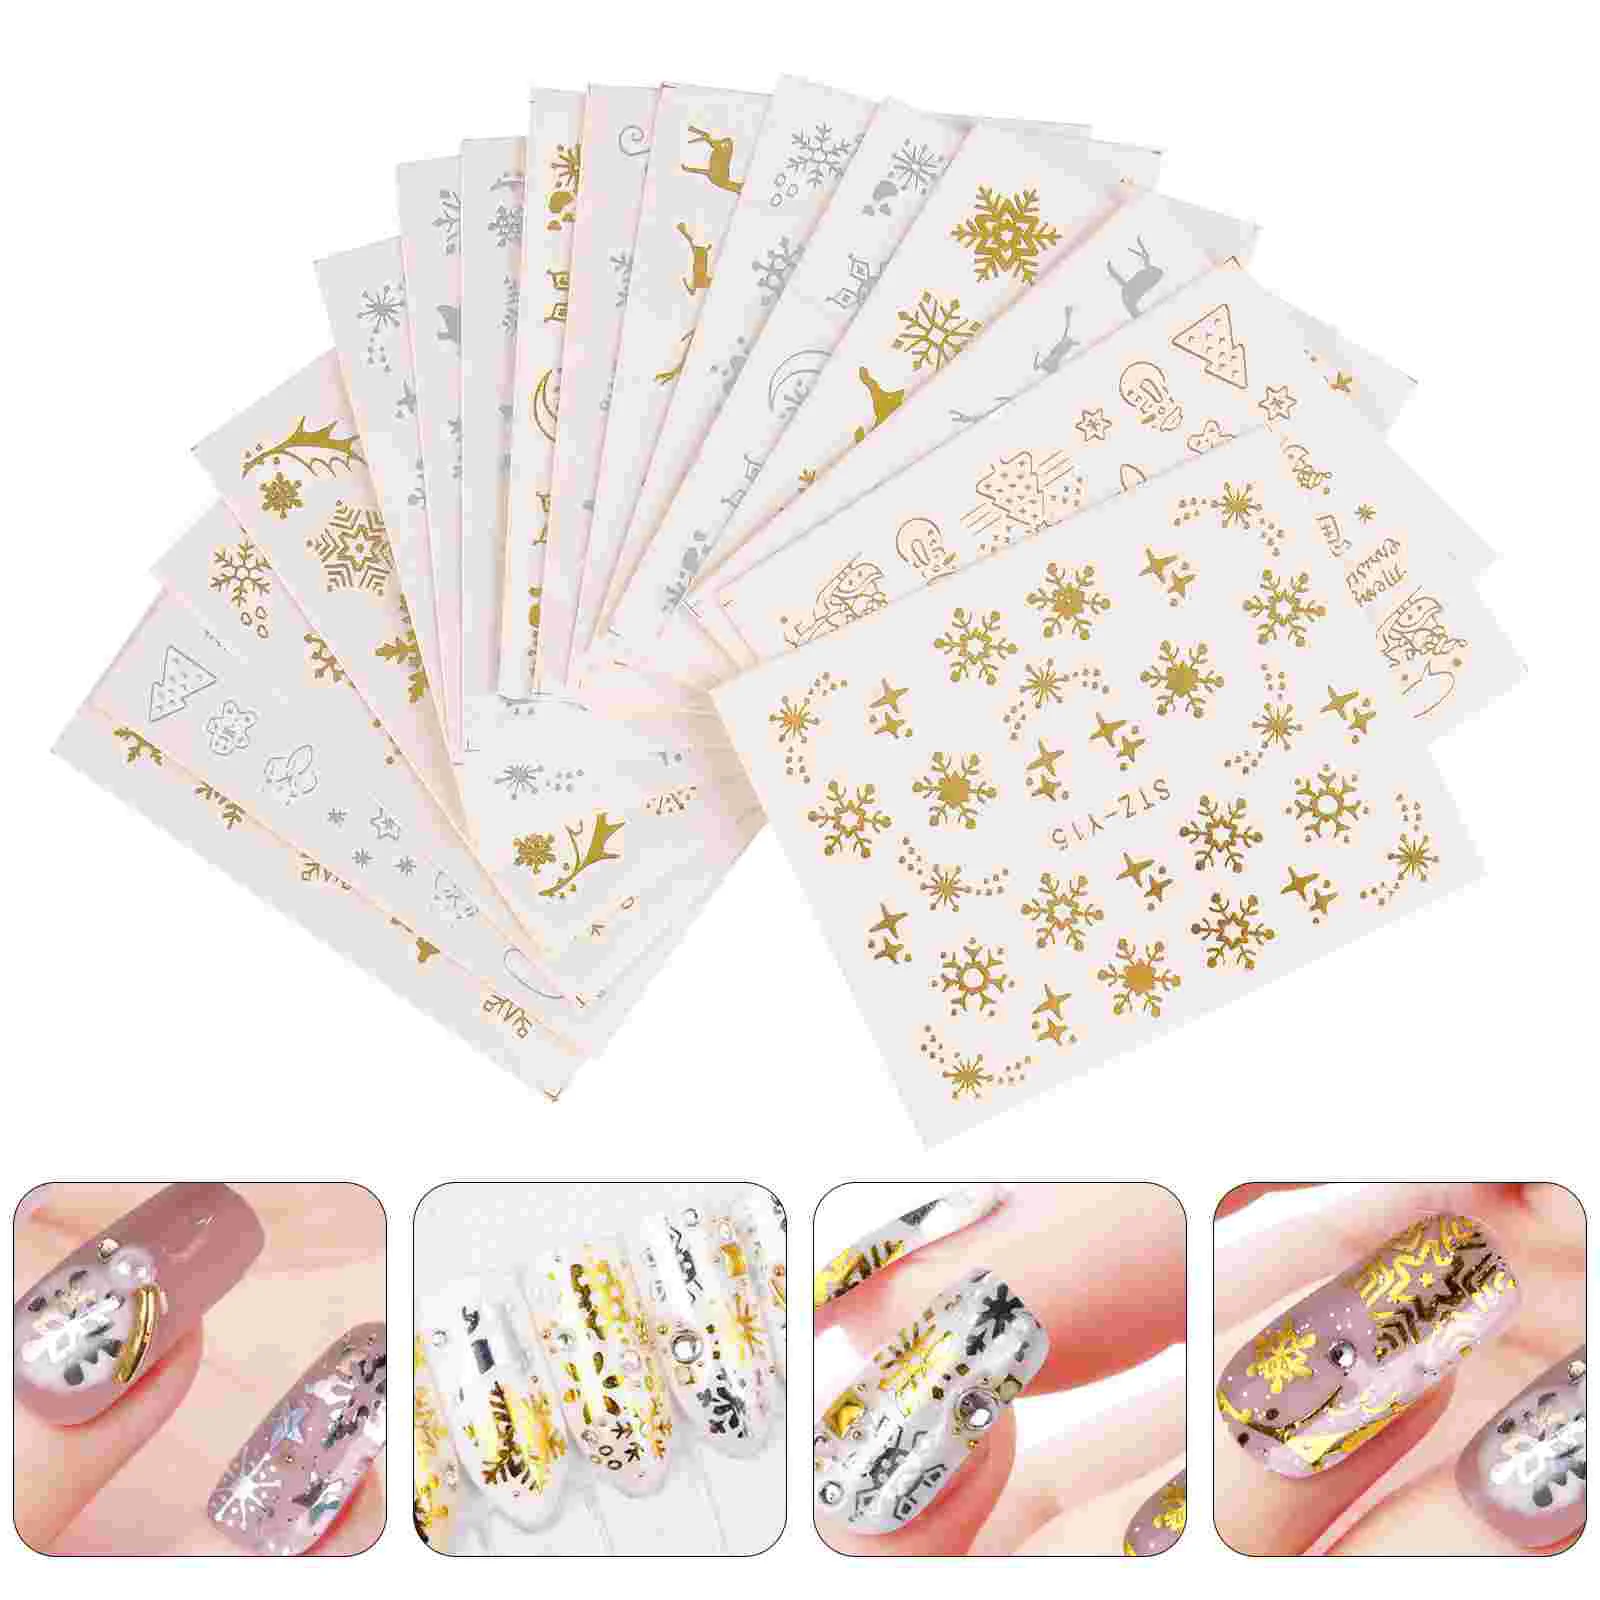 

Nail Stickersletter Women Decals Manicure Christmas Sticker Decoration Diy Watermark Holographic Adhesive 3D Girl Snowflake